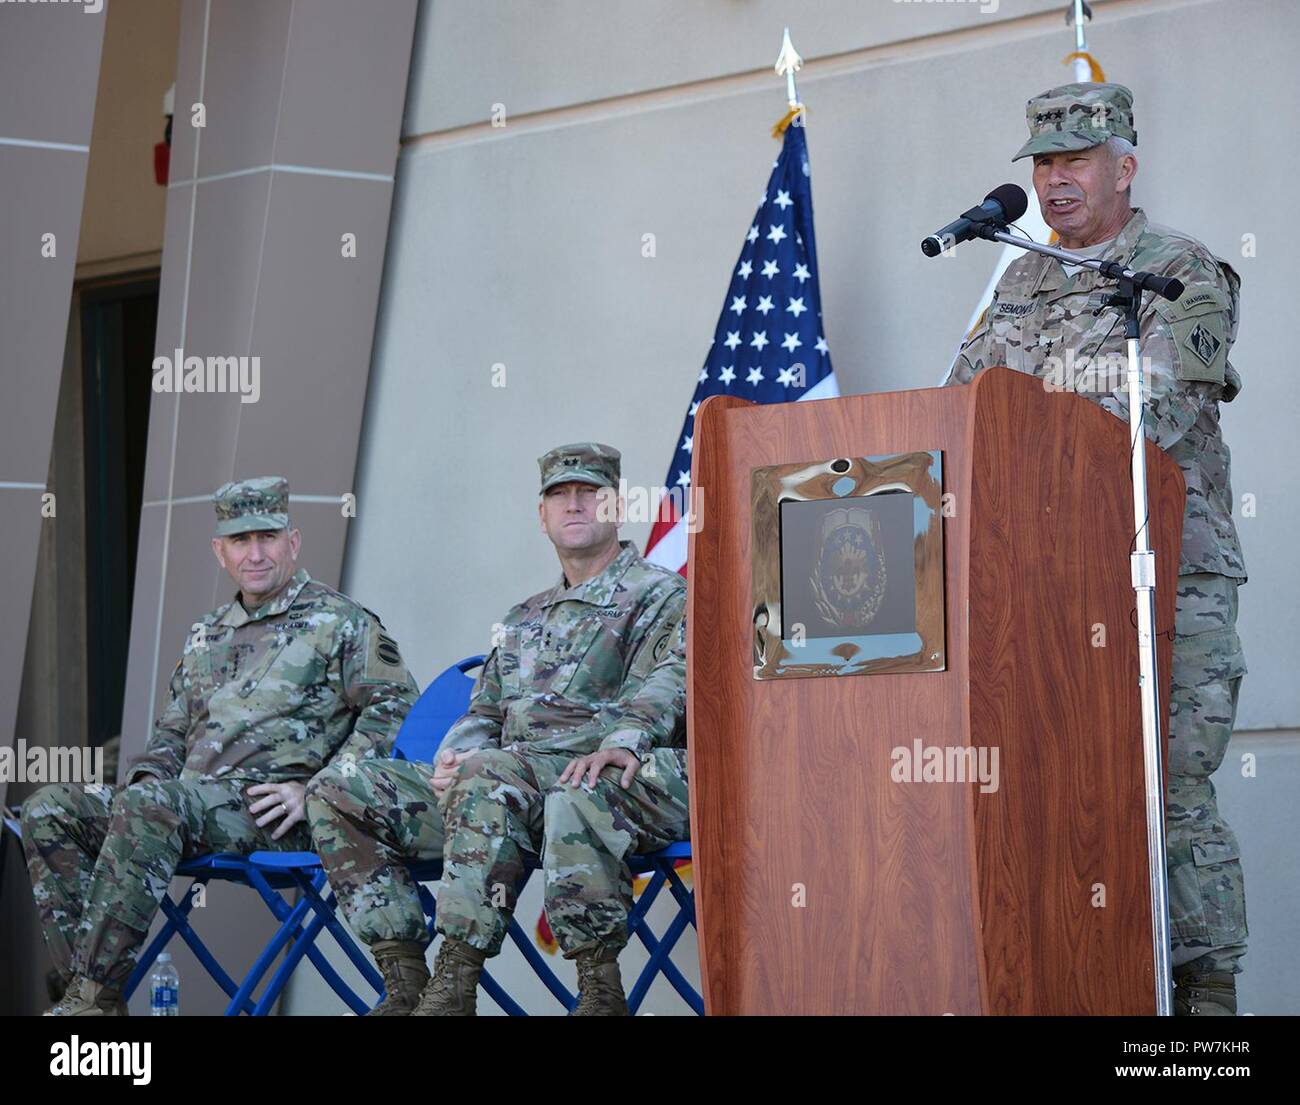 Lt. Gen. Todd Semonite, commanding general, U.S. Army Corps of Engineers, right, speaks to the audience during a Sept. 21 ribbon-cutting ceremony for the new Weed Army Community Hospital, while Gen. Robert Abrams, commanding general, U.S. Army Forces Command, left, and Maj. Gen. Thomas Tempel, commanding general, Regional Health Command-Central, center, look on. Stock Photo